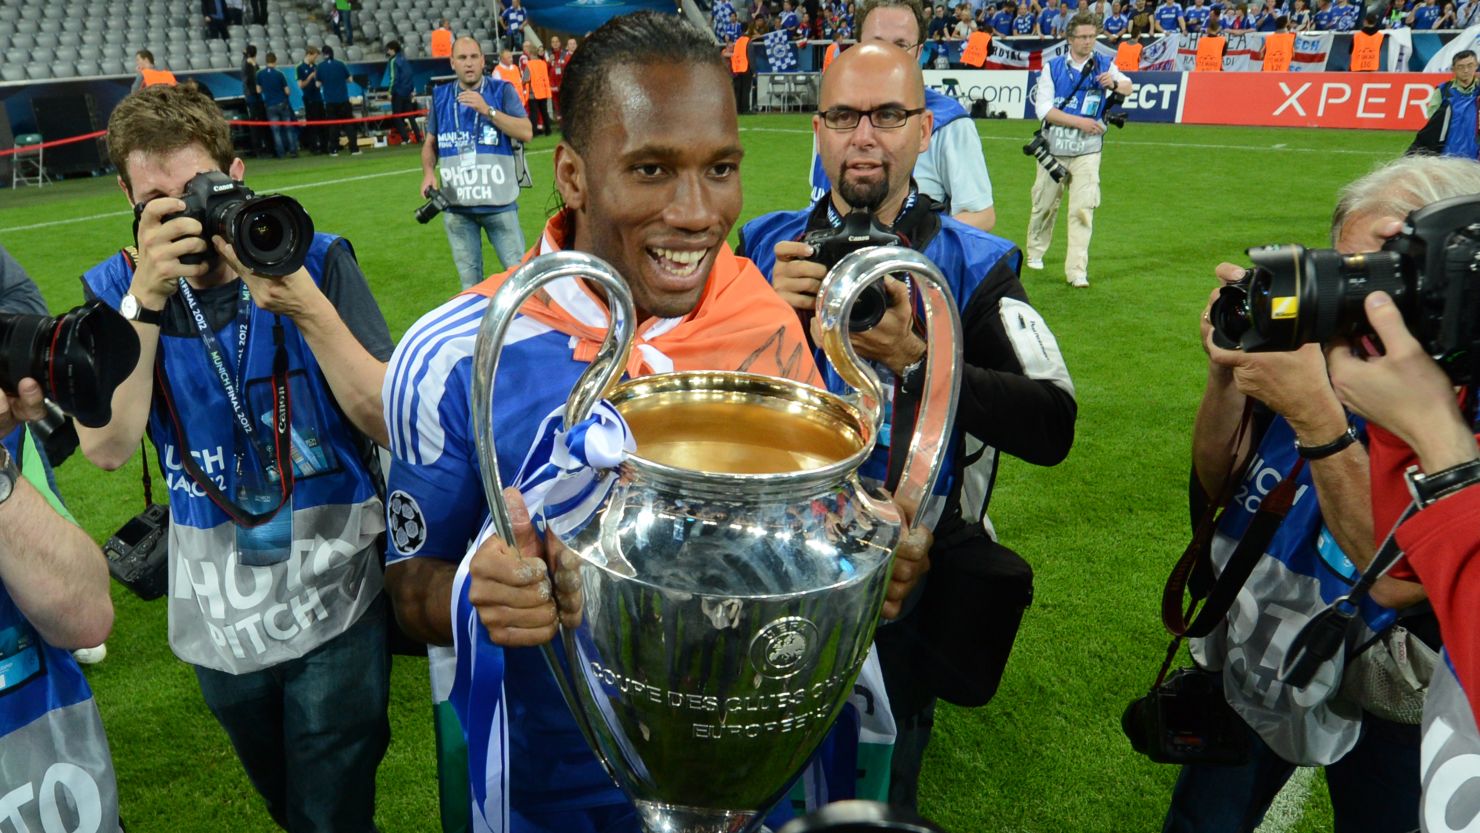 Didier Drogba's last kick in a Chelsea shirt delivered them the European Champions League